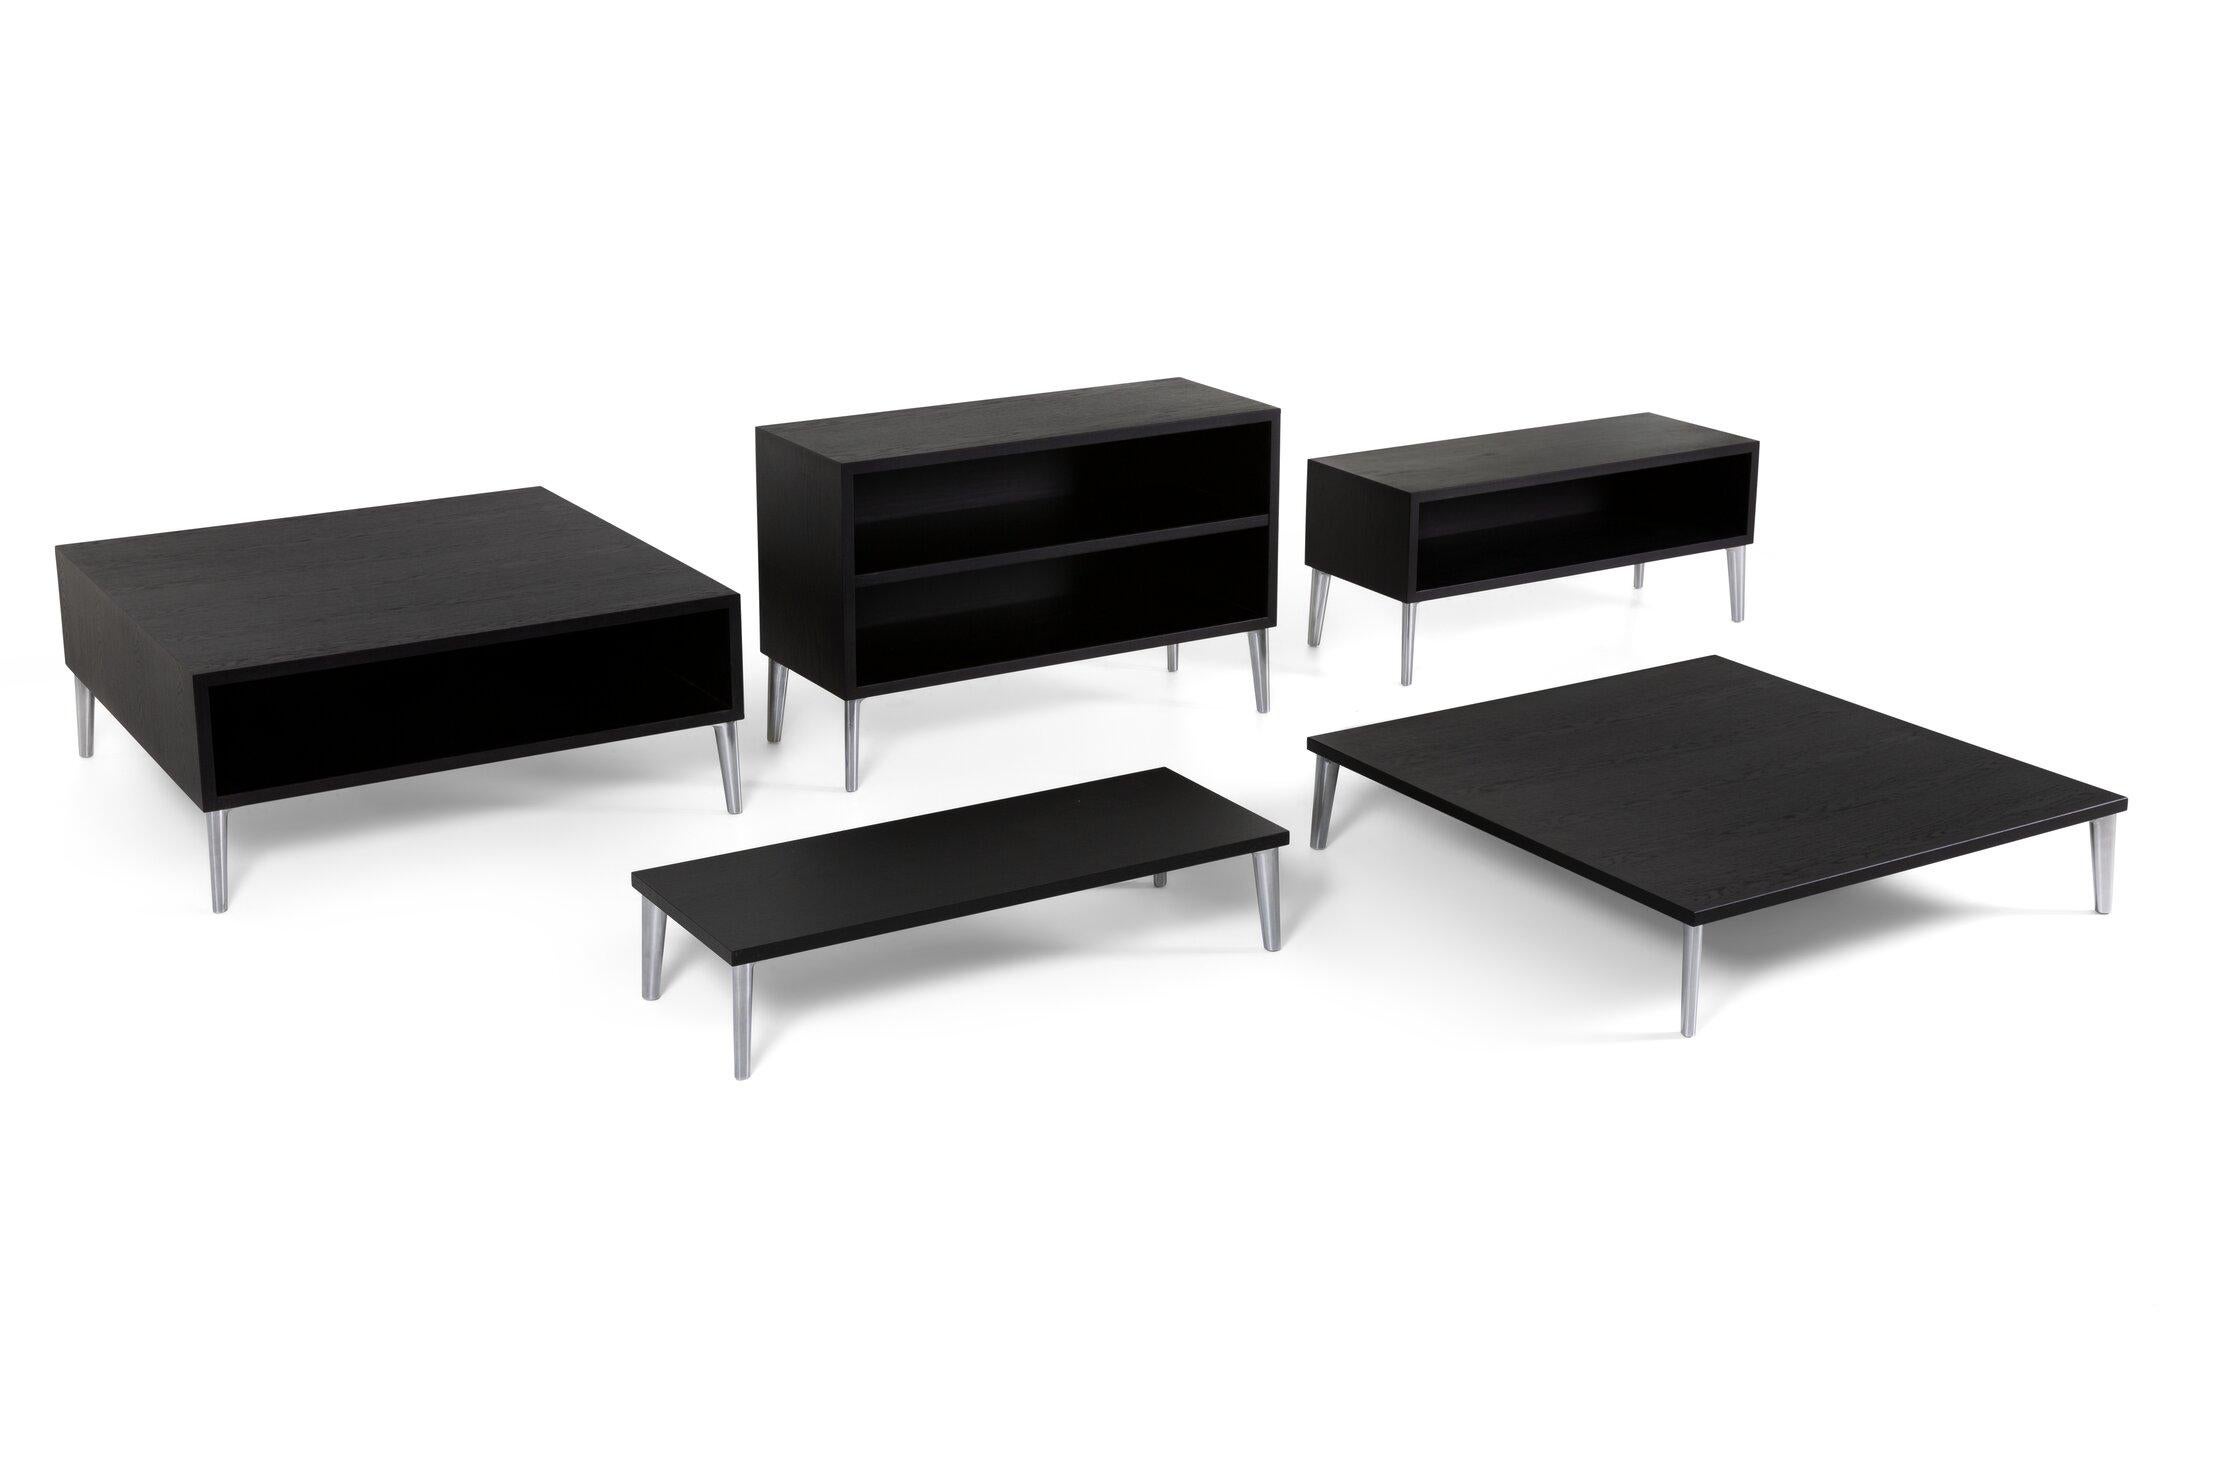 Dutch Moooi Sofa So Good Demi Table Wenge Stained by Marcel Wanders Studio For Sale